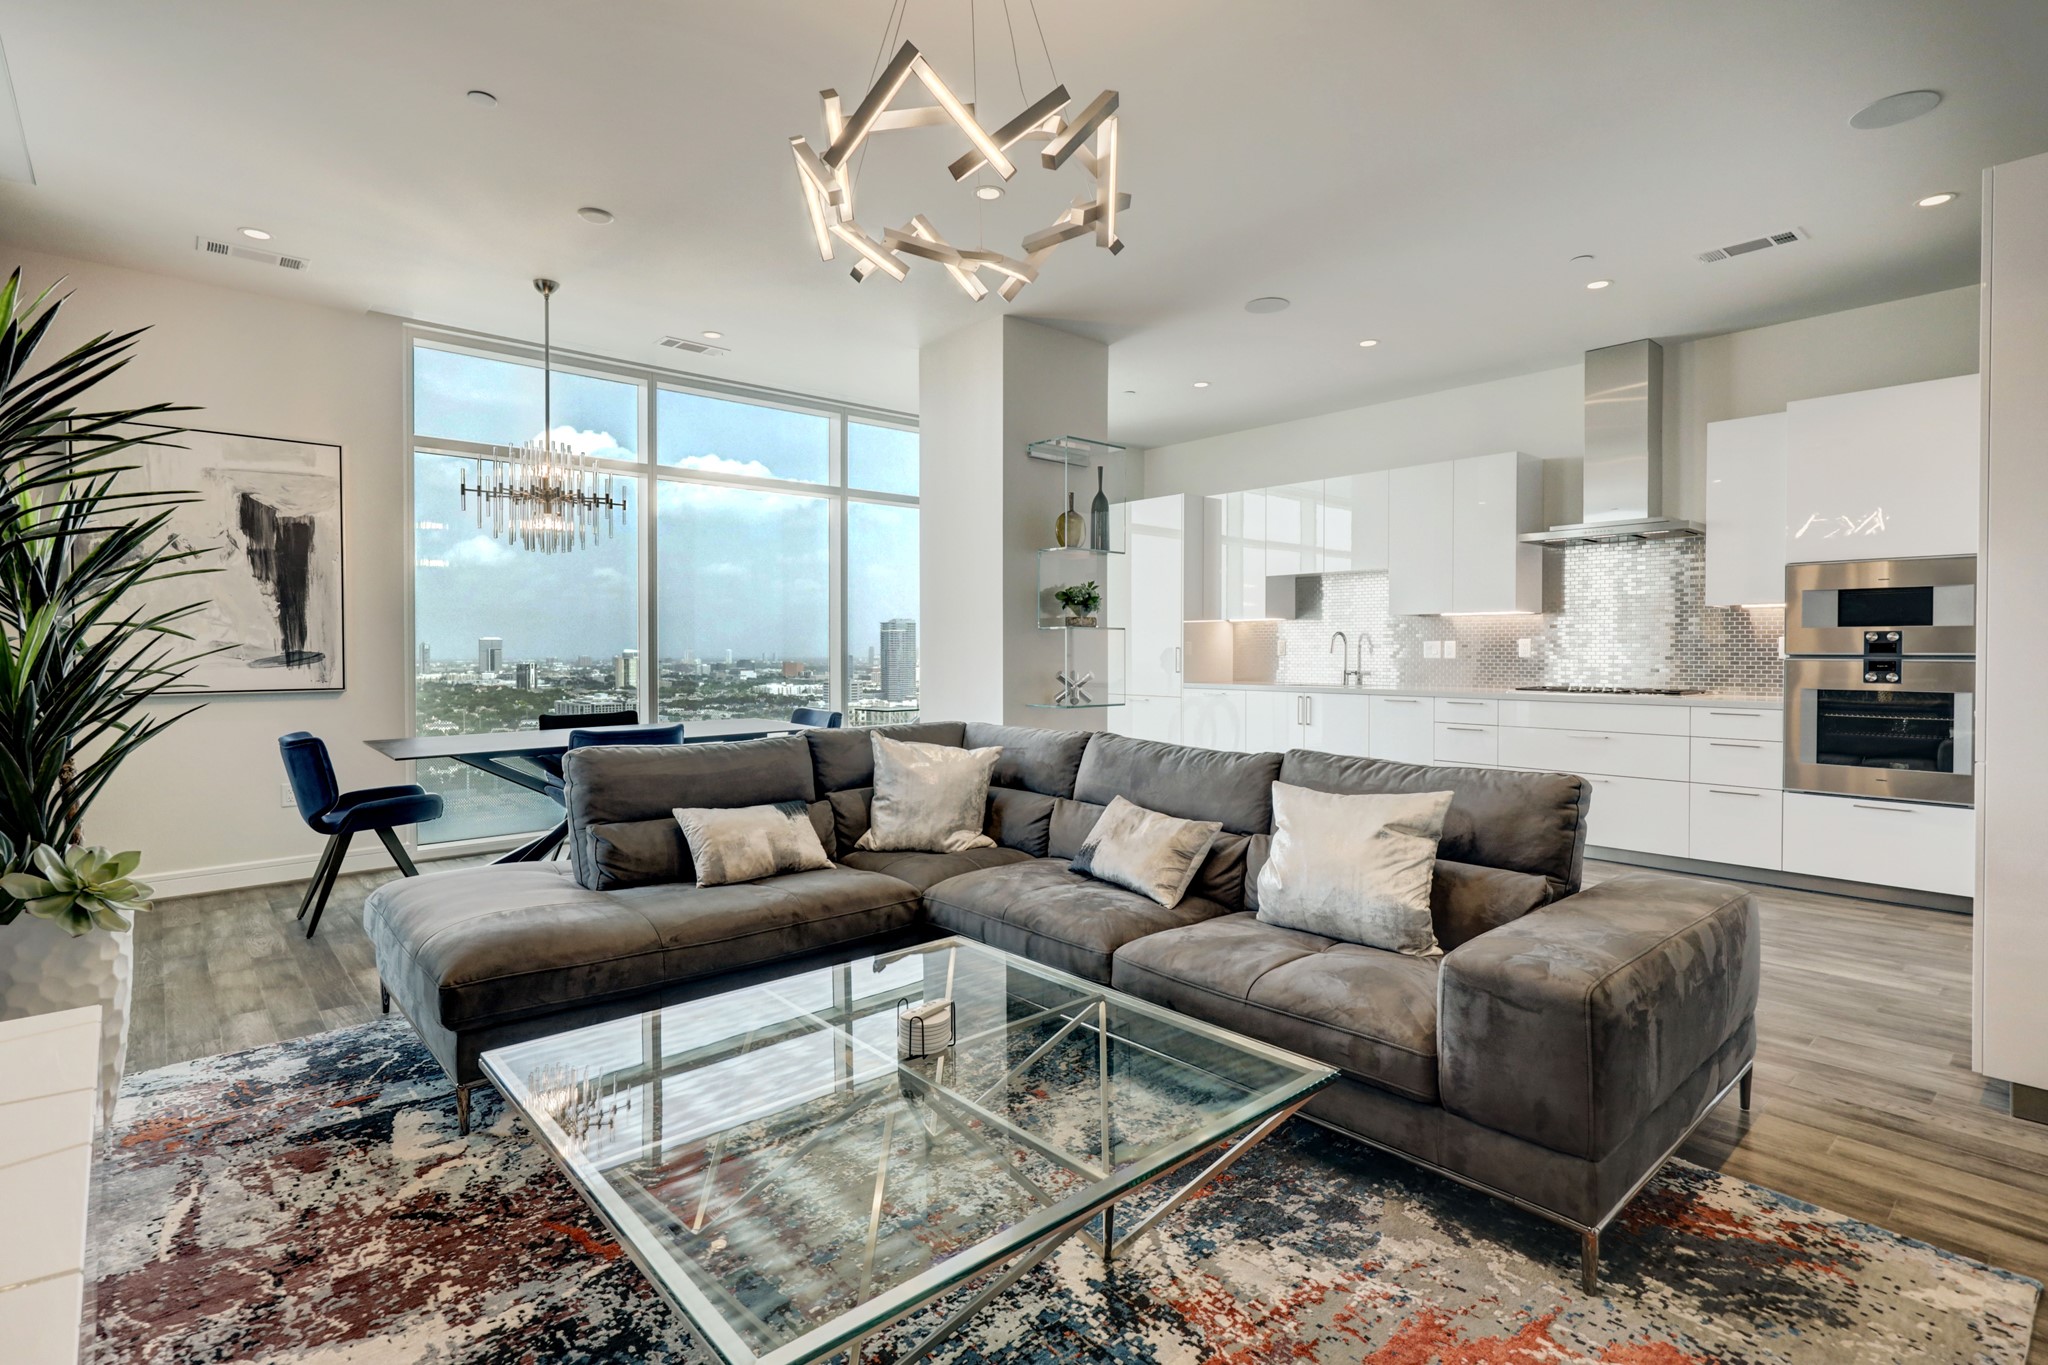 Beautiful open concept with breathtaking views from the 25th floor